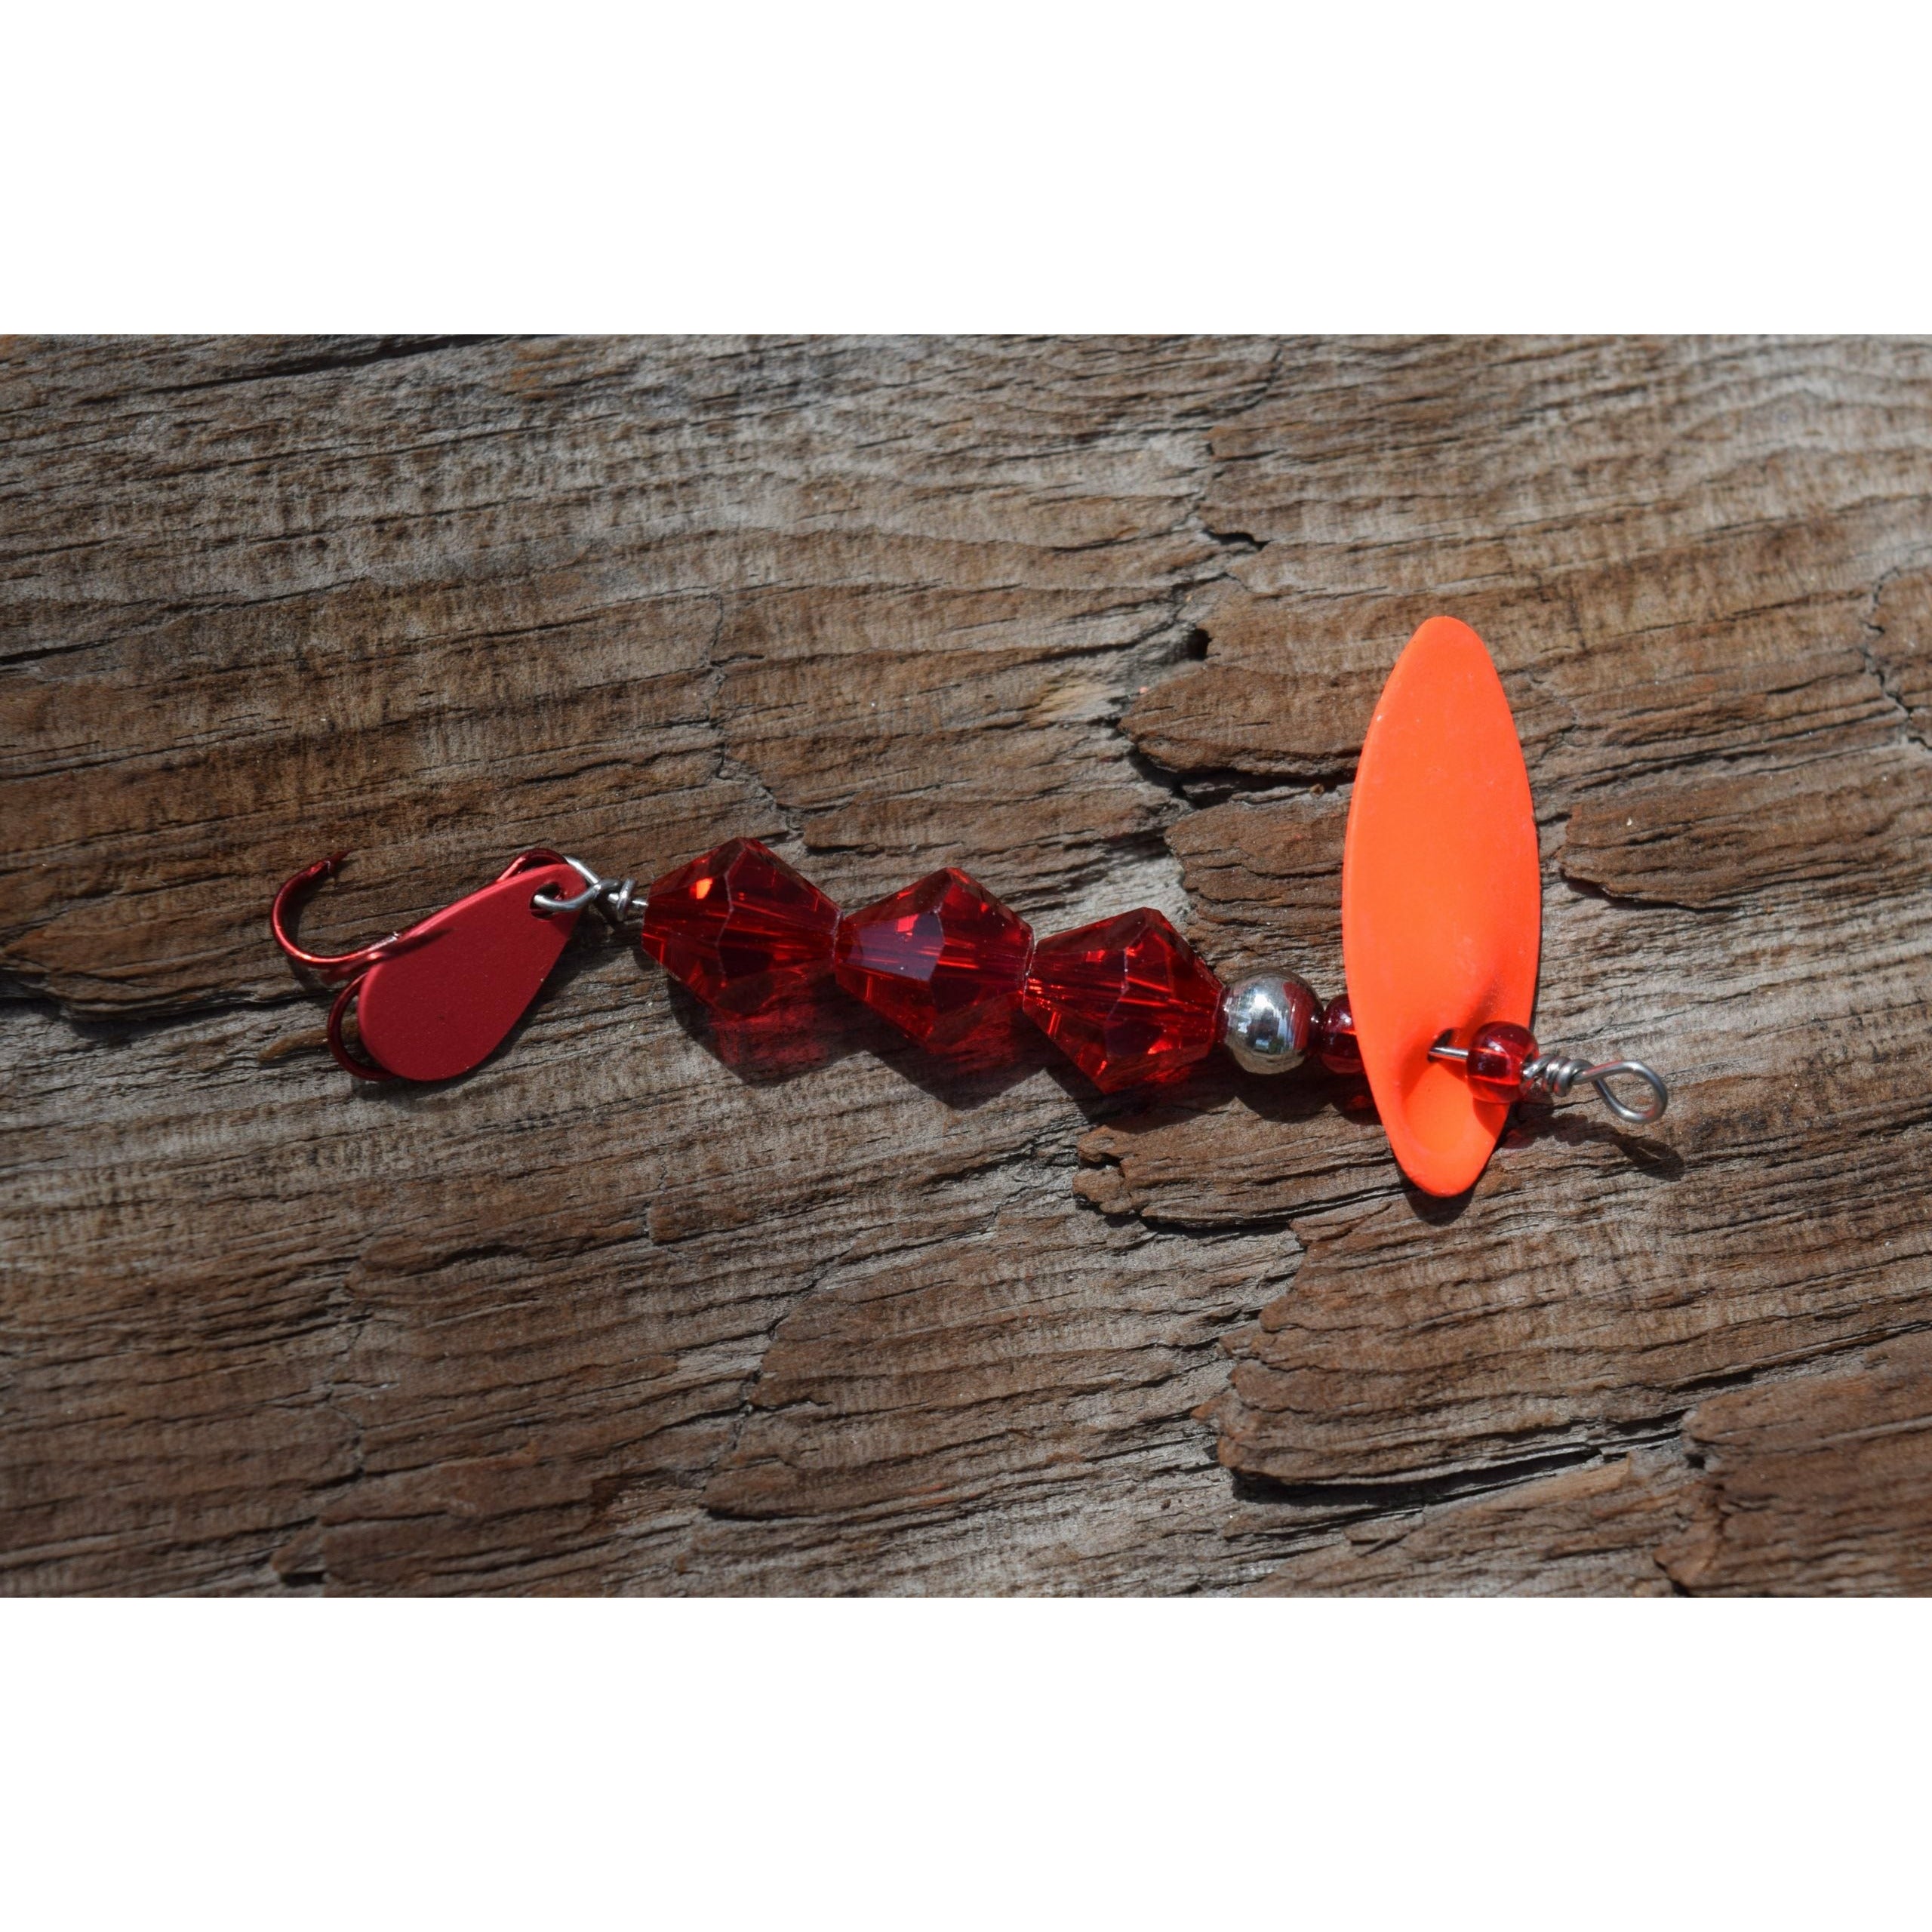 CREEK FREAK MASTER BAITS ULTRALIGHT IN-LINE FISHING LURE - Copperstate Tackle